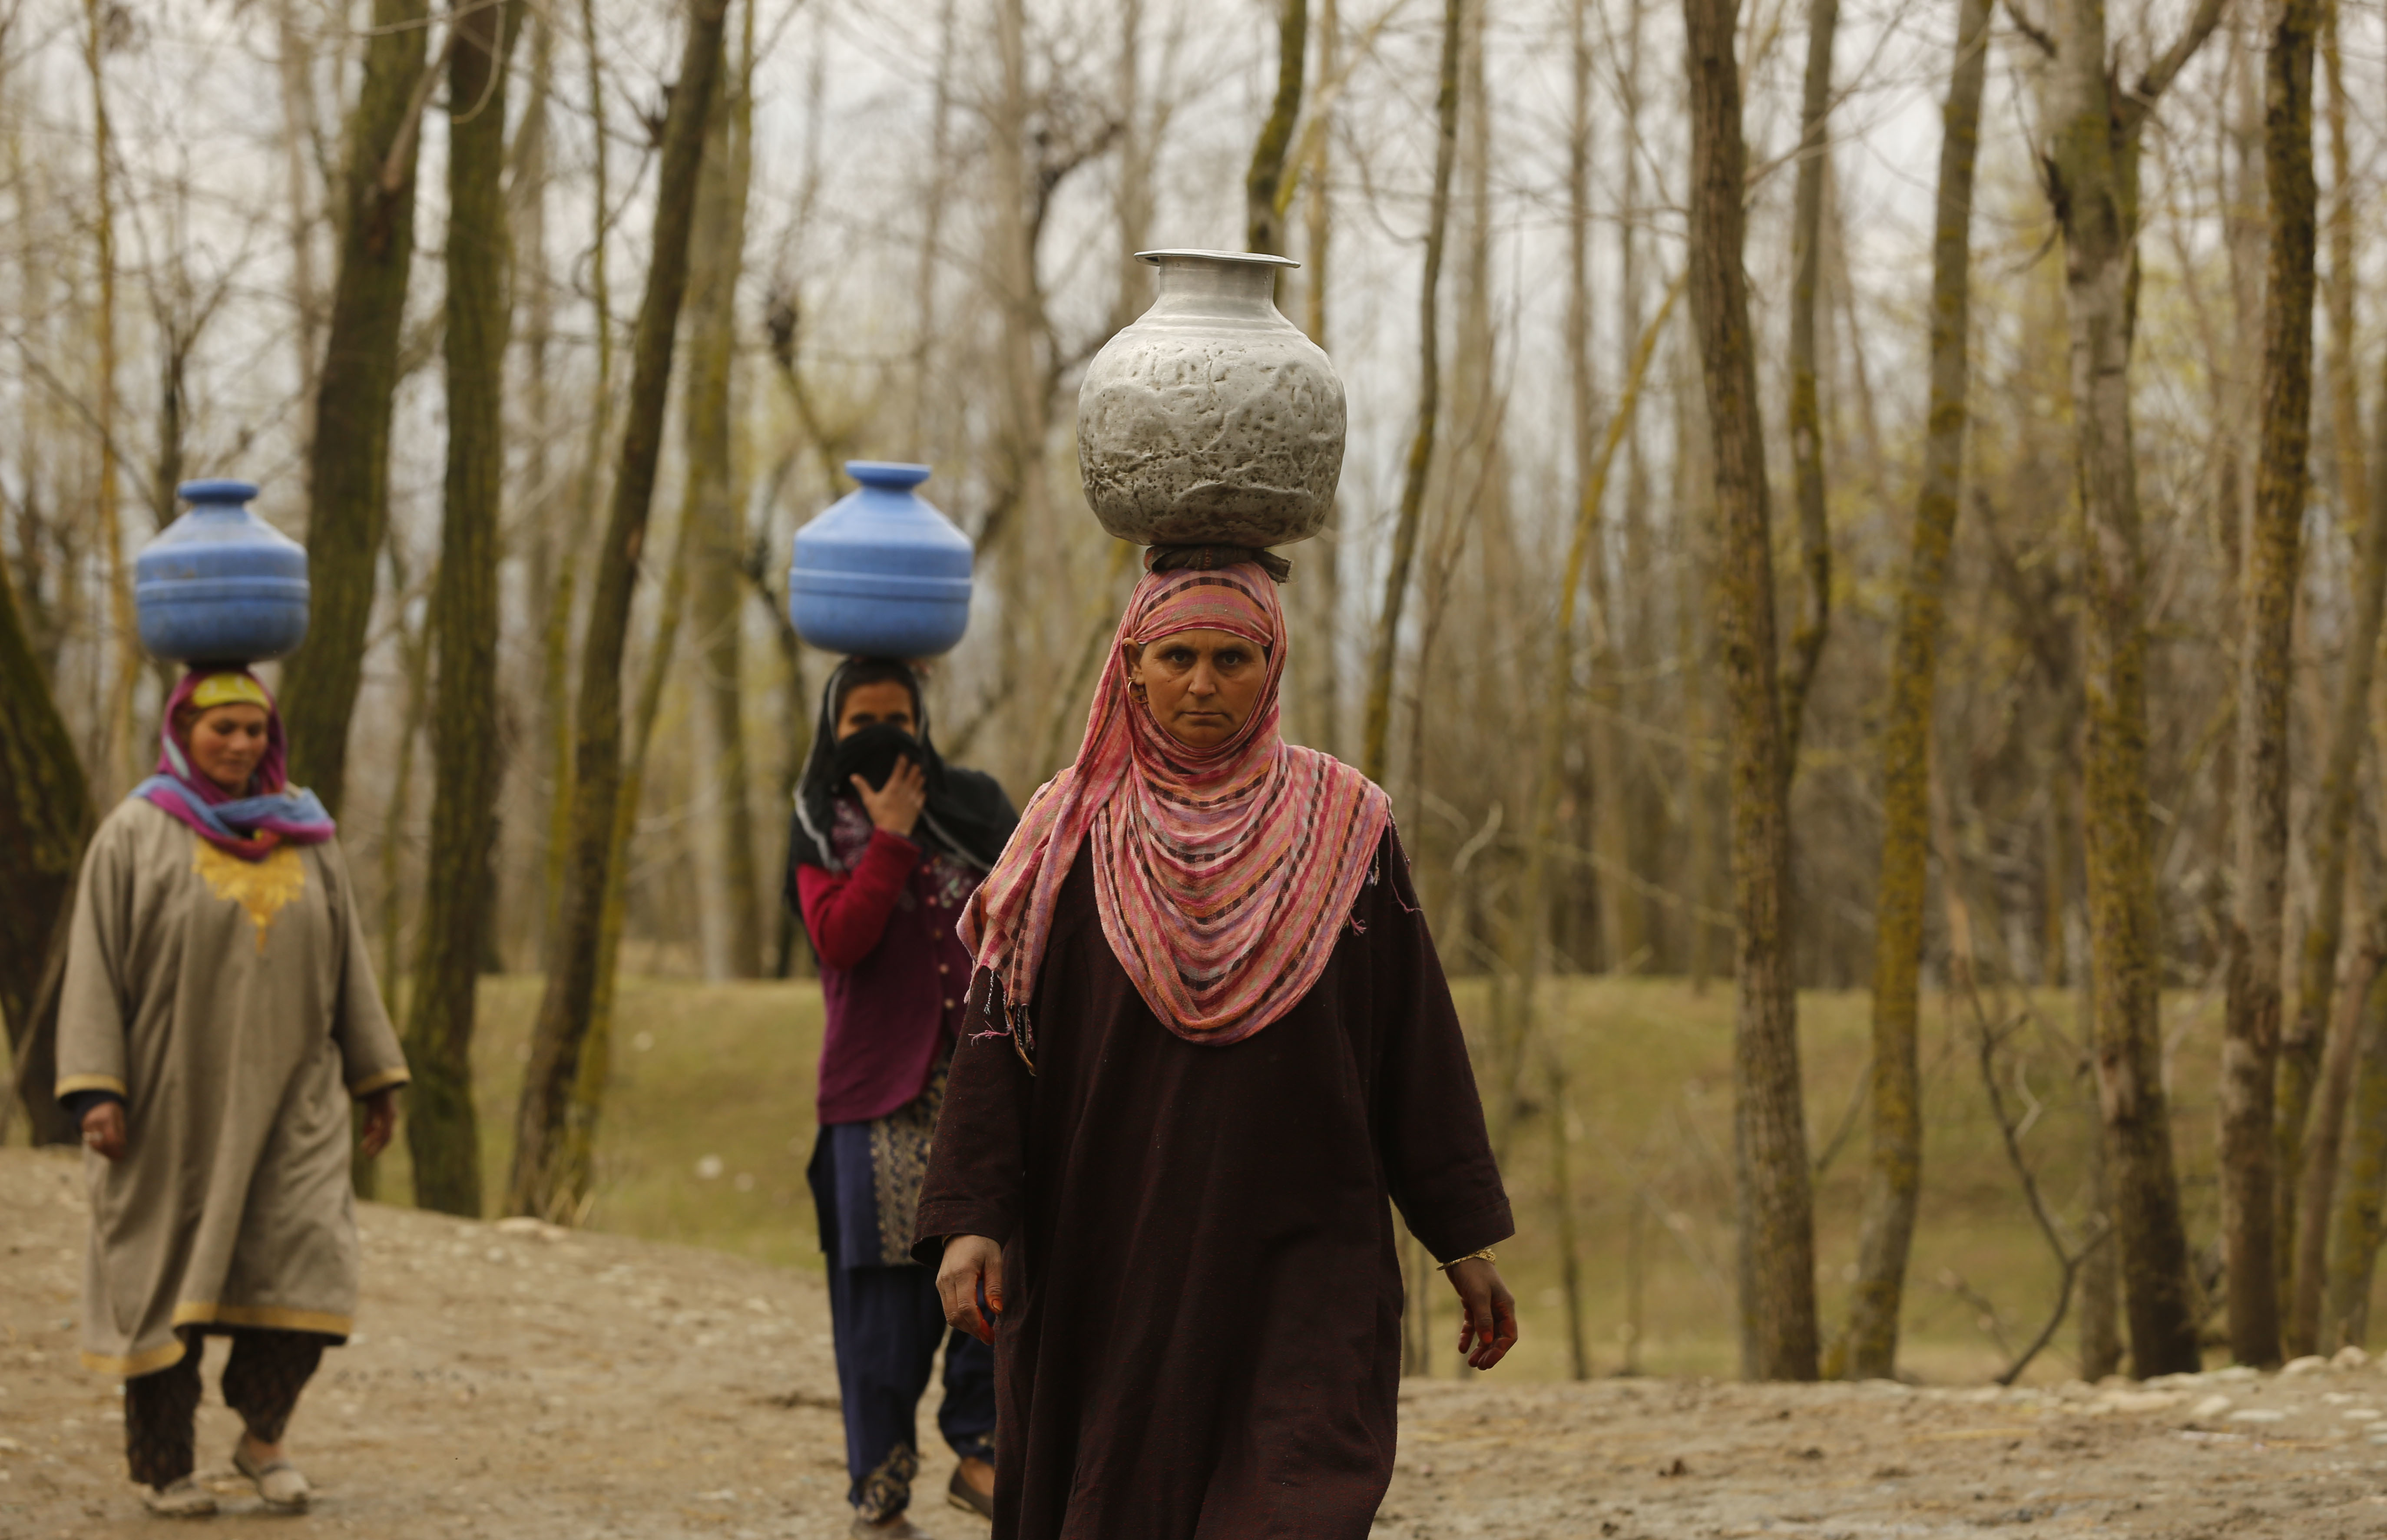 Kashmiri village women walk towards their home after collecting water from a river, on World Water Day in Dasilpora, north of Srinagar, Indian controlled Kashmir, Wednesday, March 22, 2017.  India has the world's highest number of people without access to clean water. According to UNICEF, the U.N.'s children's agency, nearly 78 million Indians — or about 5 percent of the country's 1.3 billion population — must make do with contaminated water sources or buy water at high rates. (AP Photo/Mukhtar Khan)